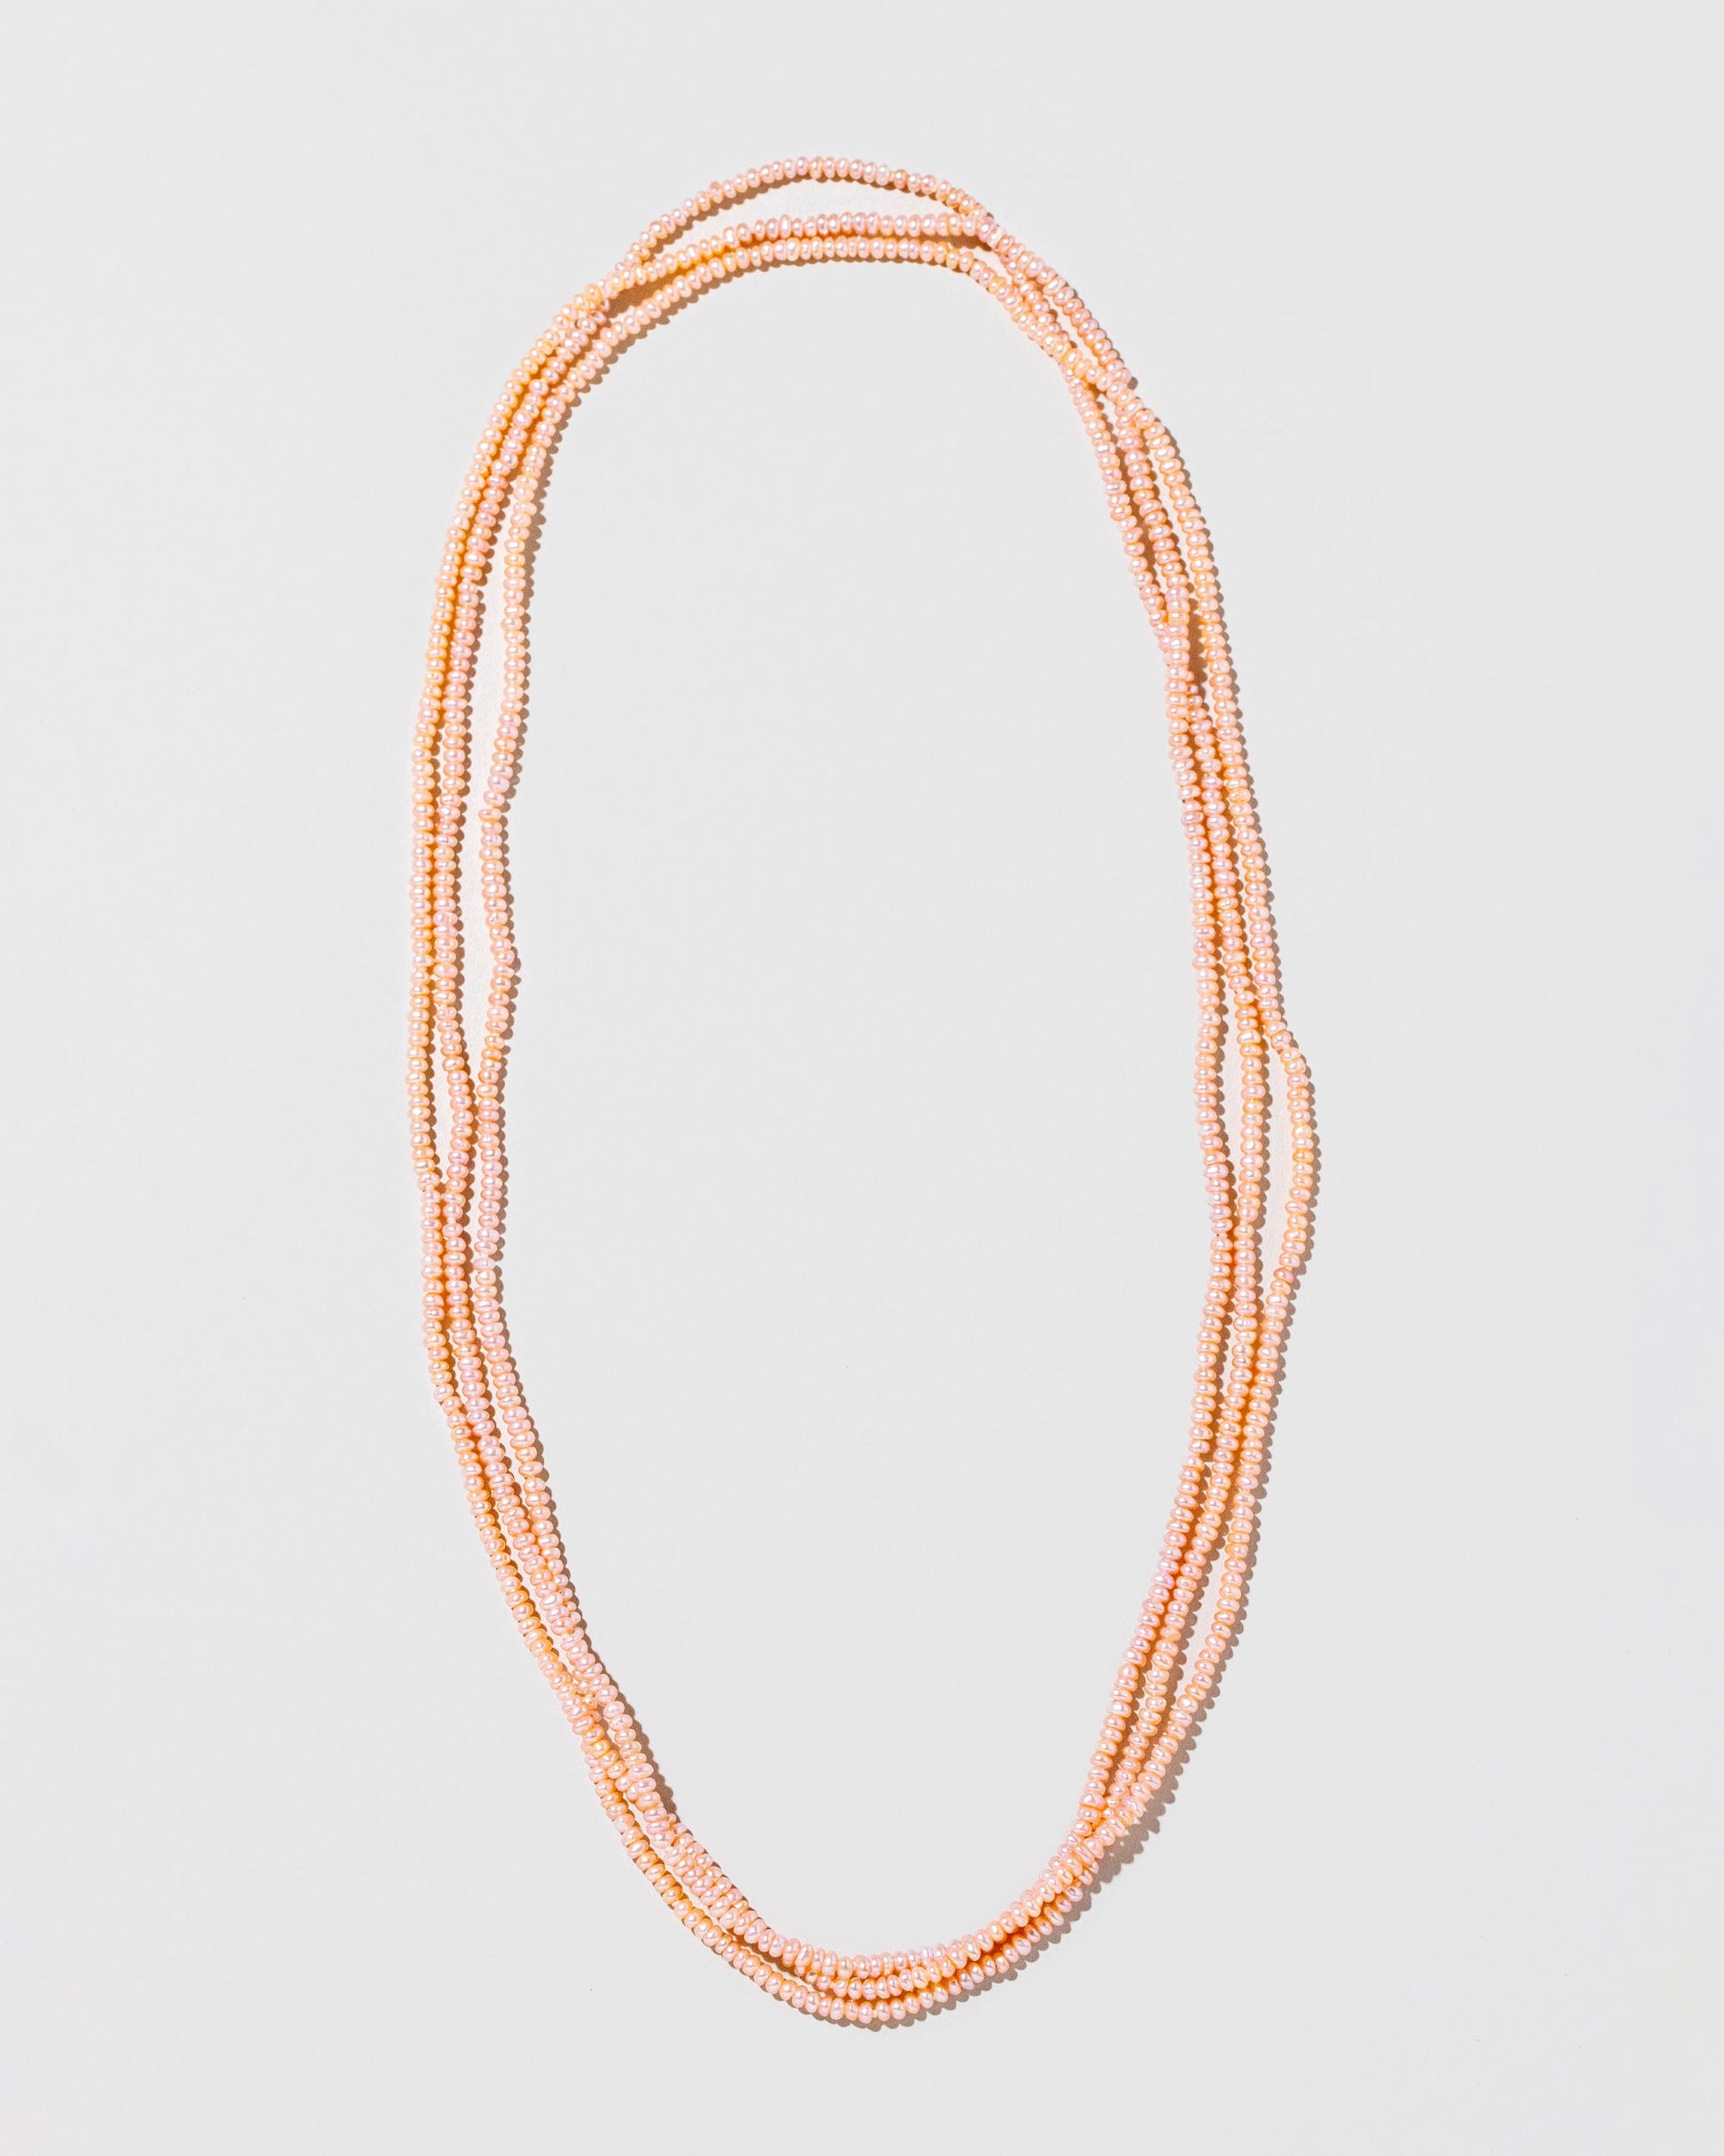  Seed Pearl Rope Necklace on light color background.